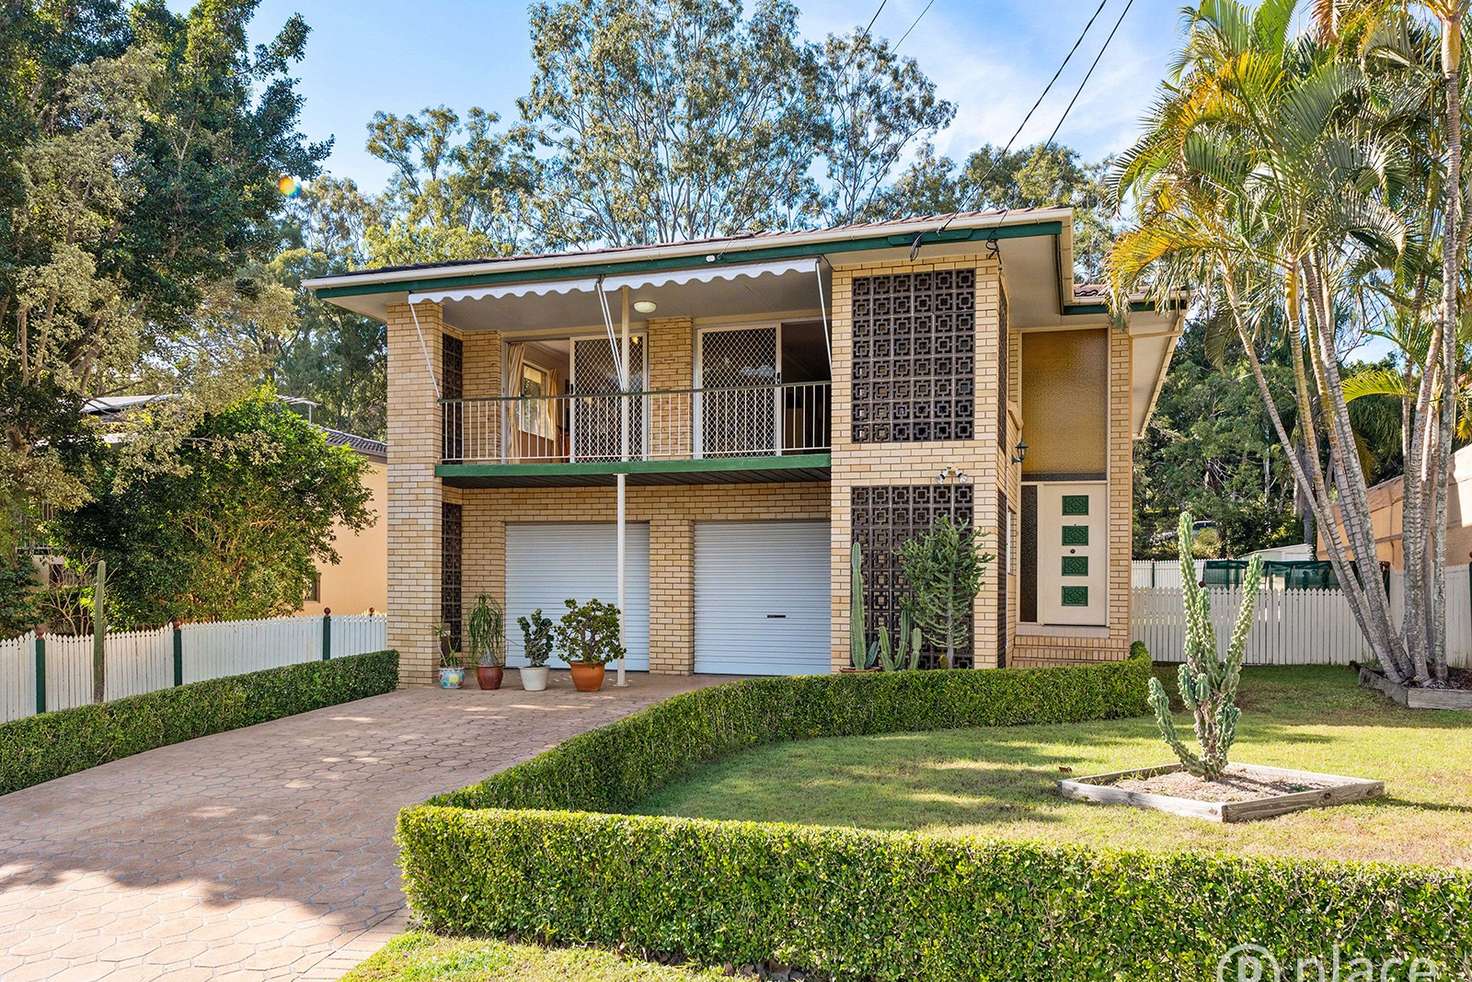 Main view of Homely house listing, 22 Capella Street, Coorparoo QLD 4151